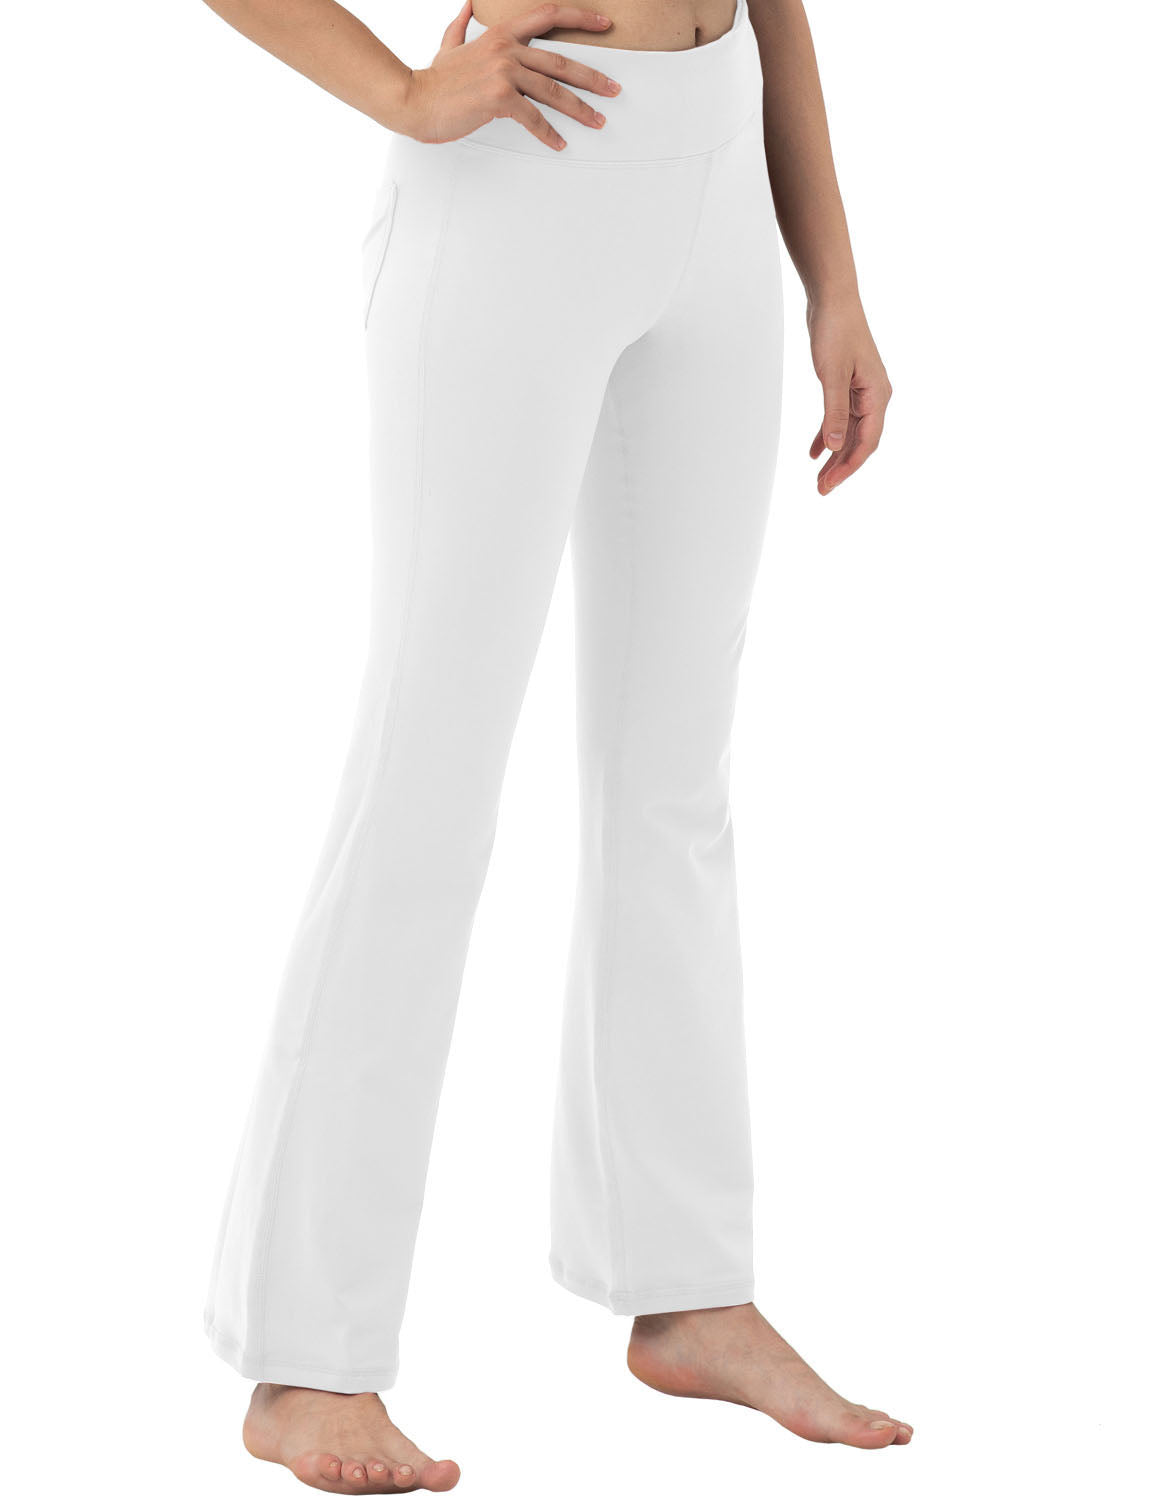 Back Pockets Bootcut Leggings White 87%Nylon/13%Spandex Fabric doesn't attract lint easily 4-way stretch No see-through Moisture-wicking Inner pocket Four lengths